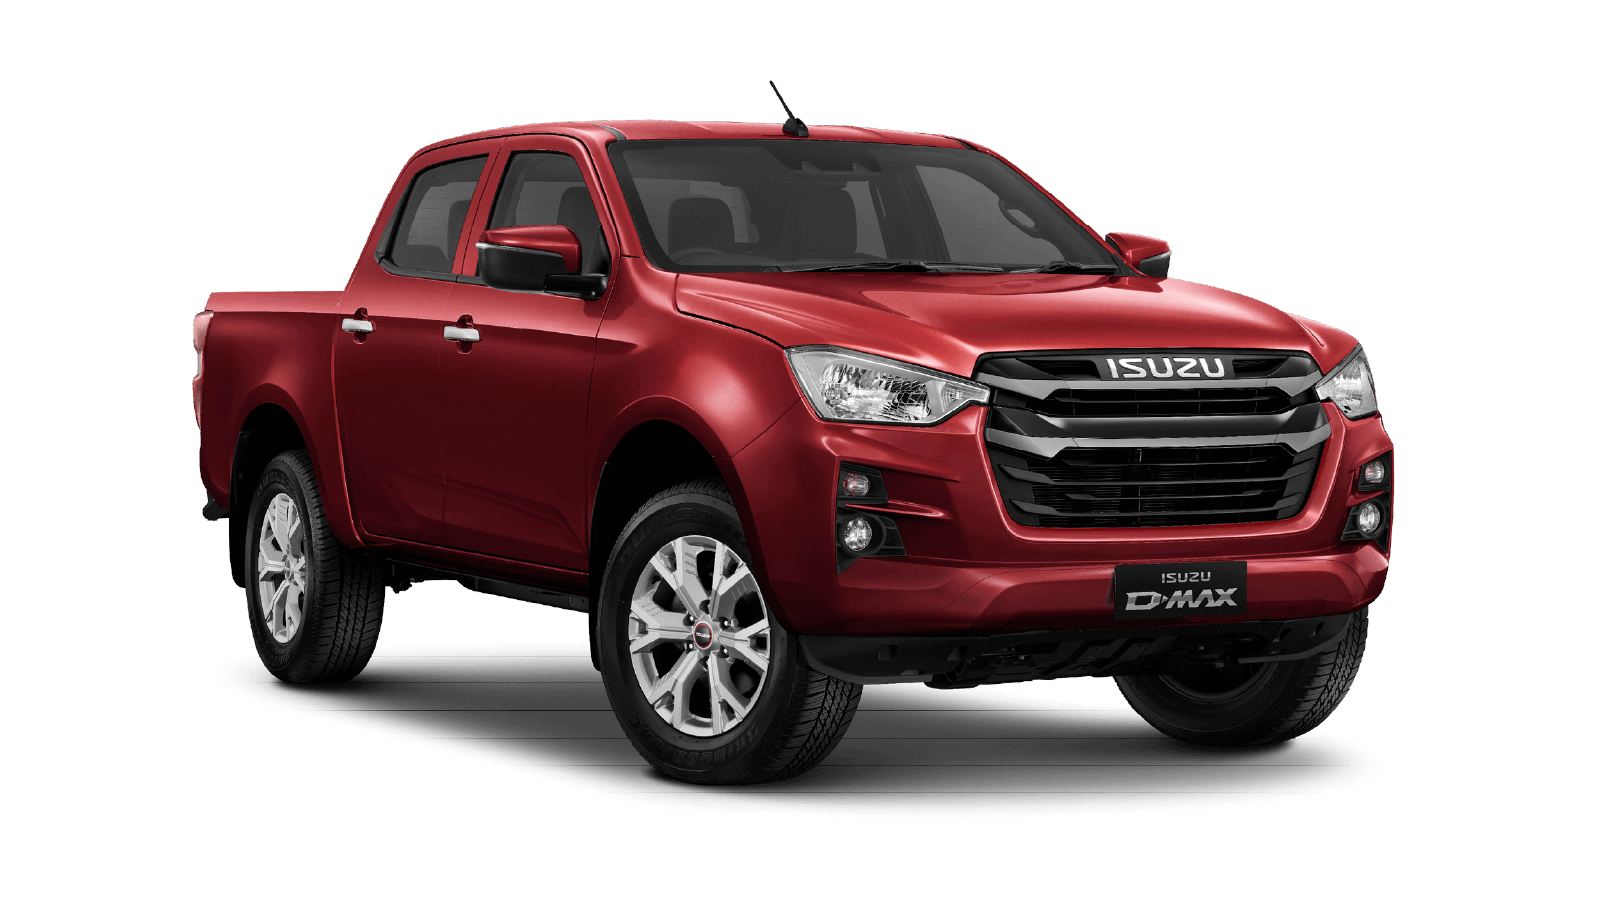 Isuzu D-Max DL20 Double Cab Spinel Red